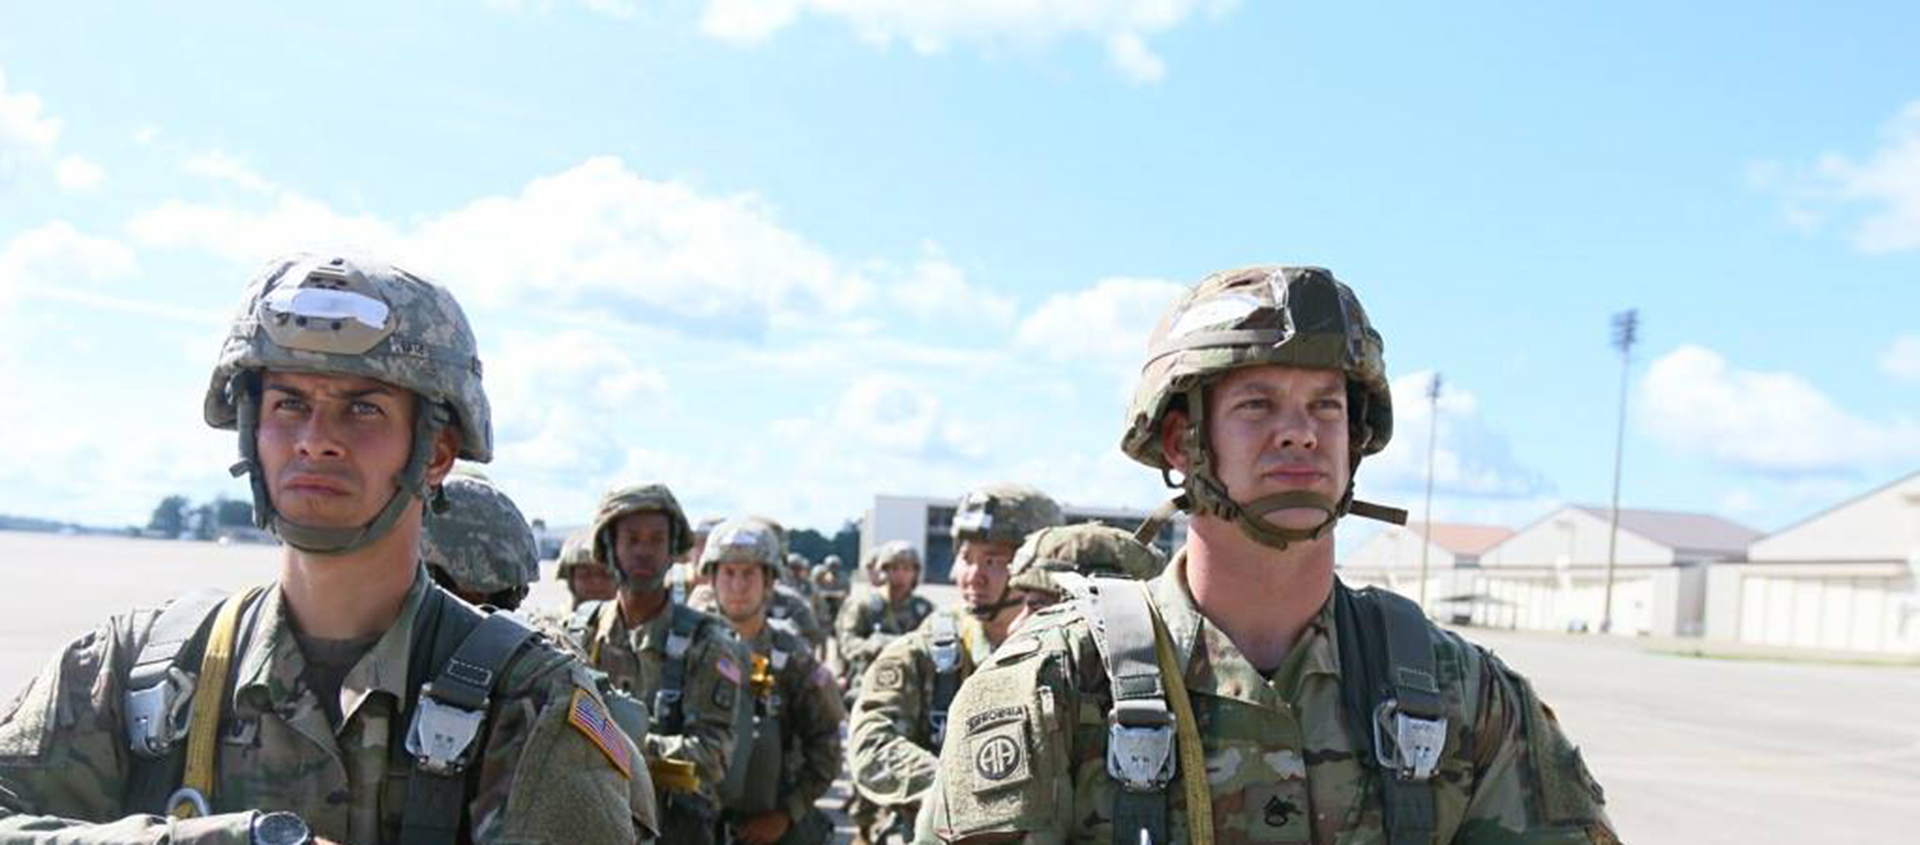 Soldiers at Fort Bragg